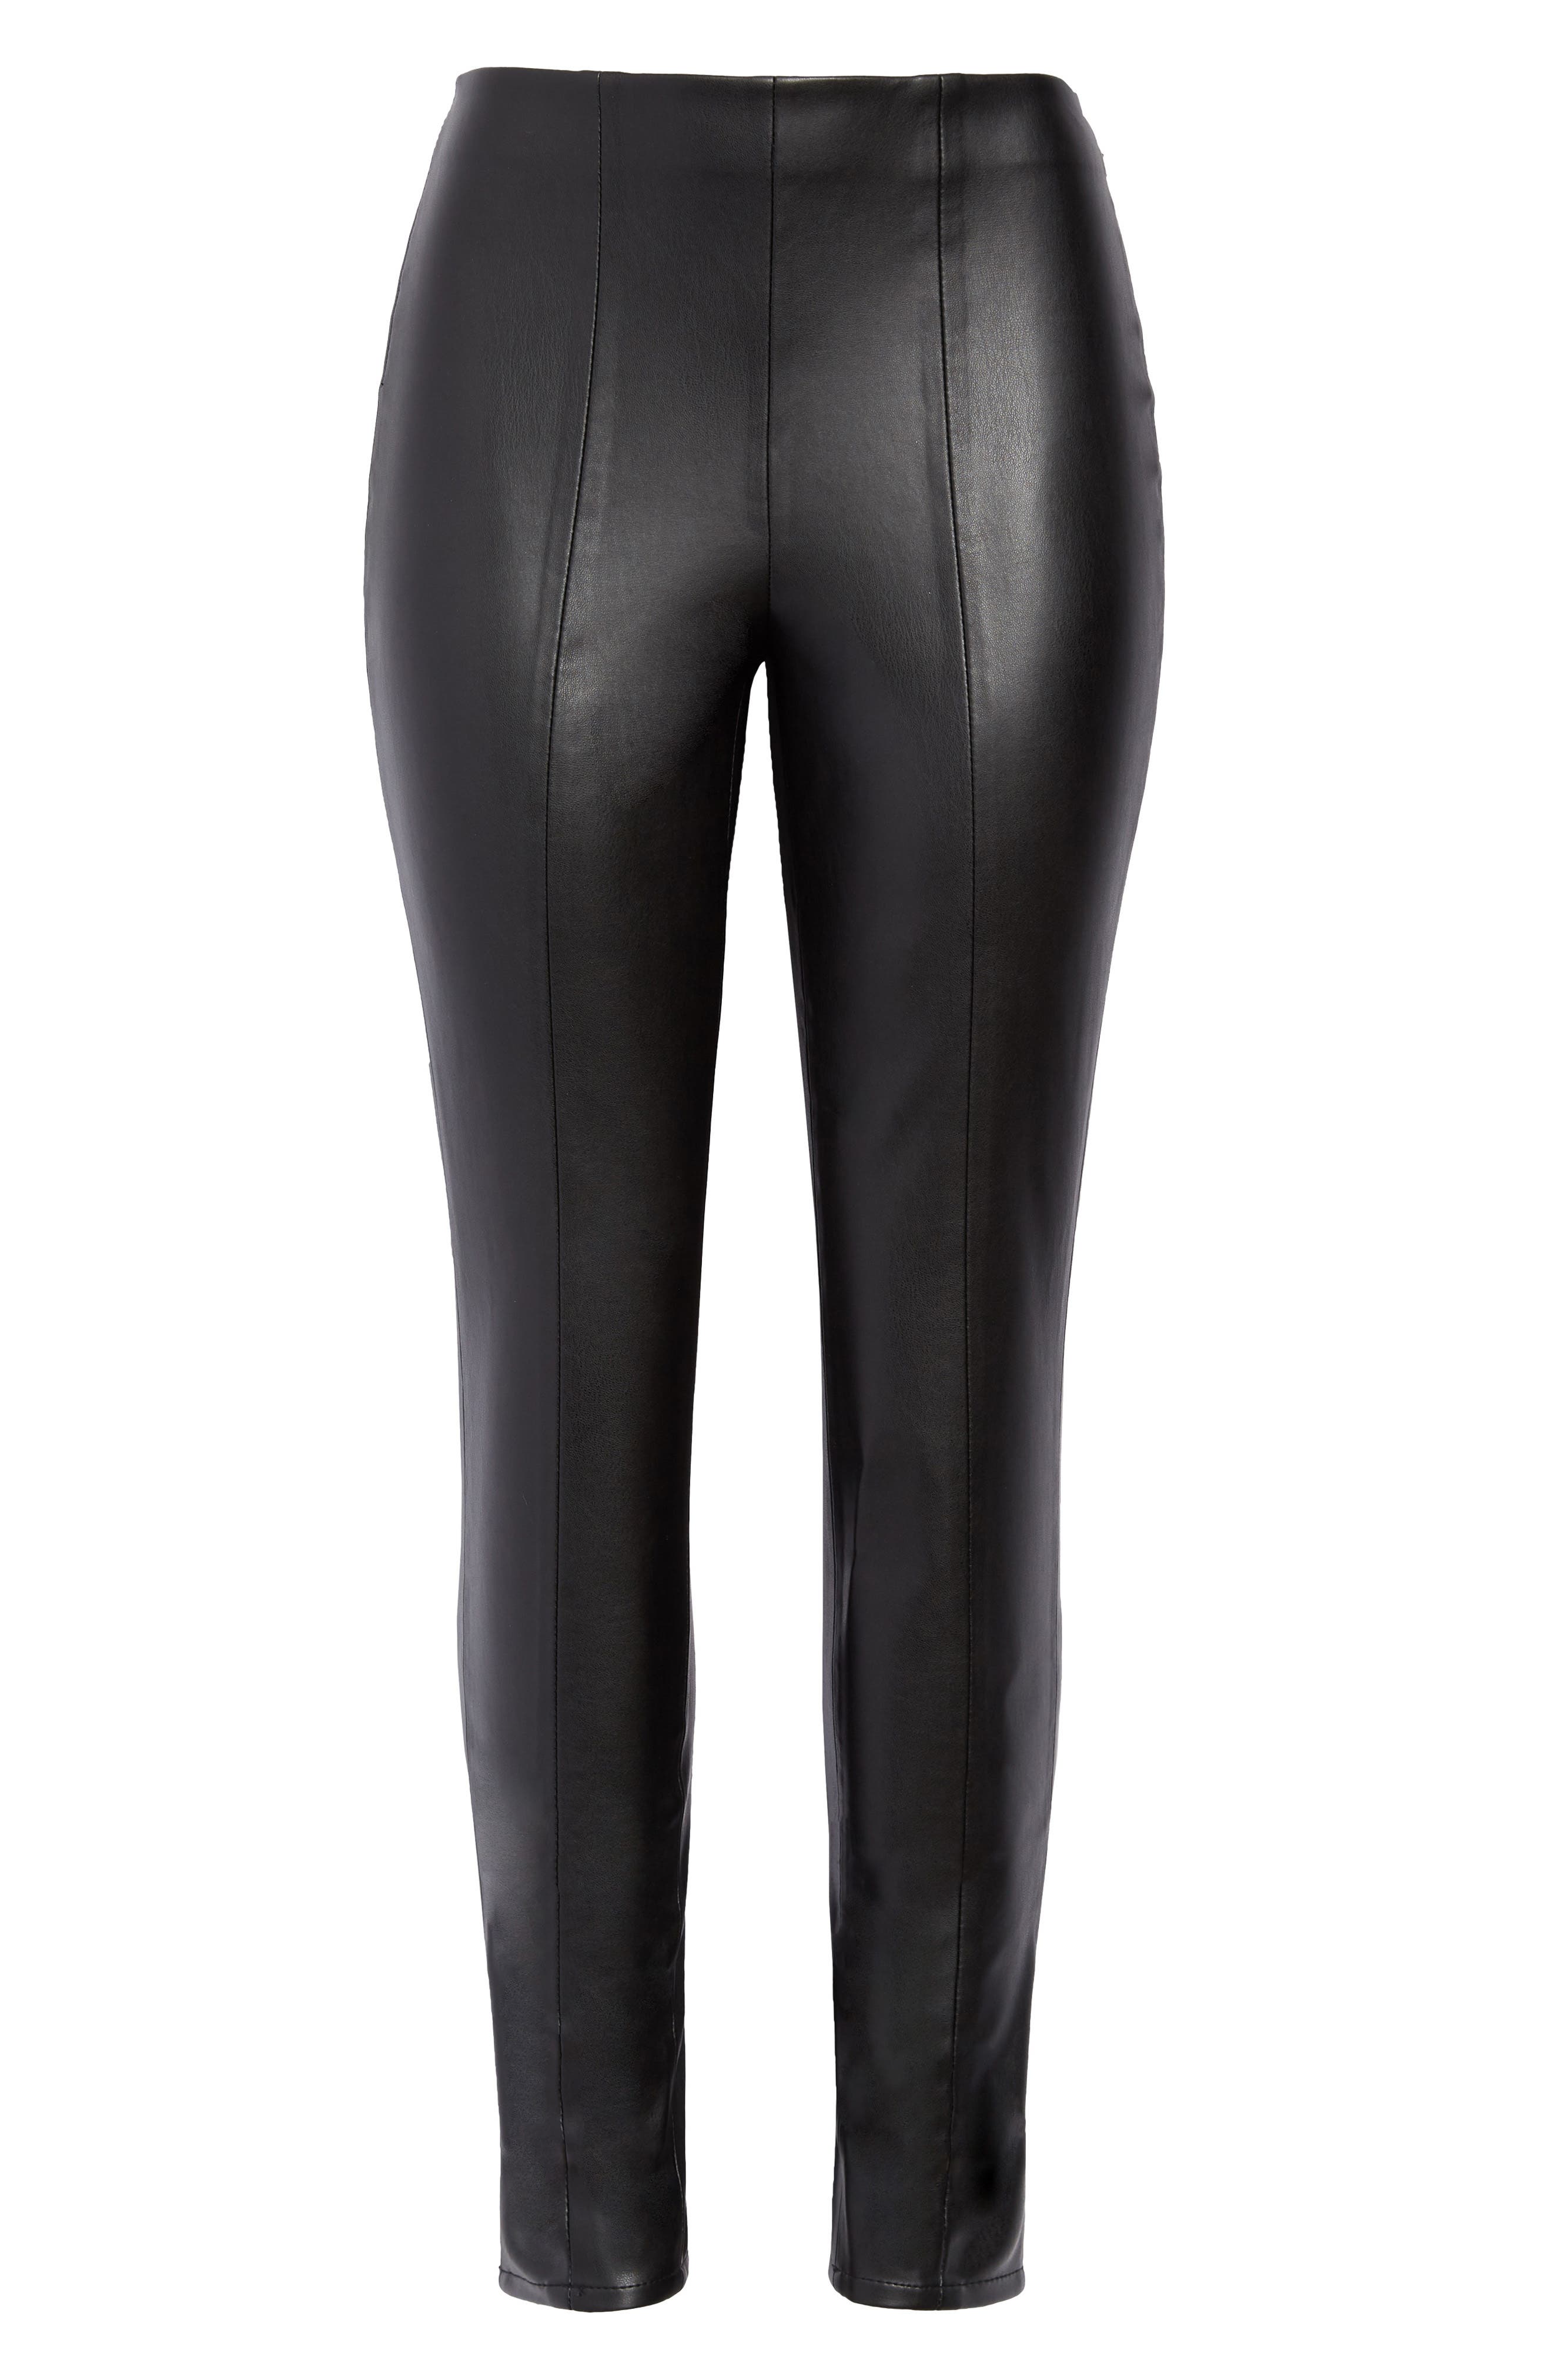 womens leather pants canada